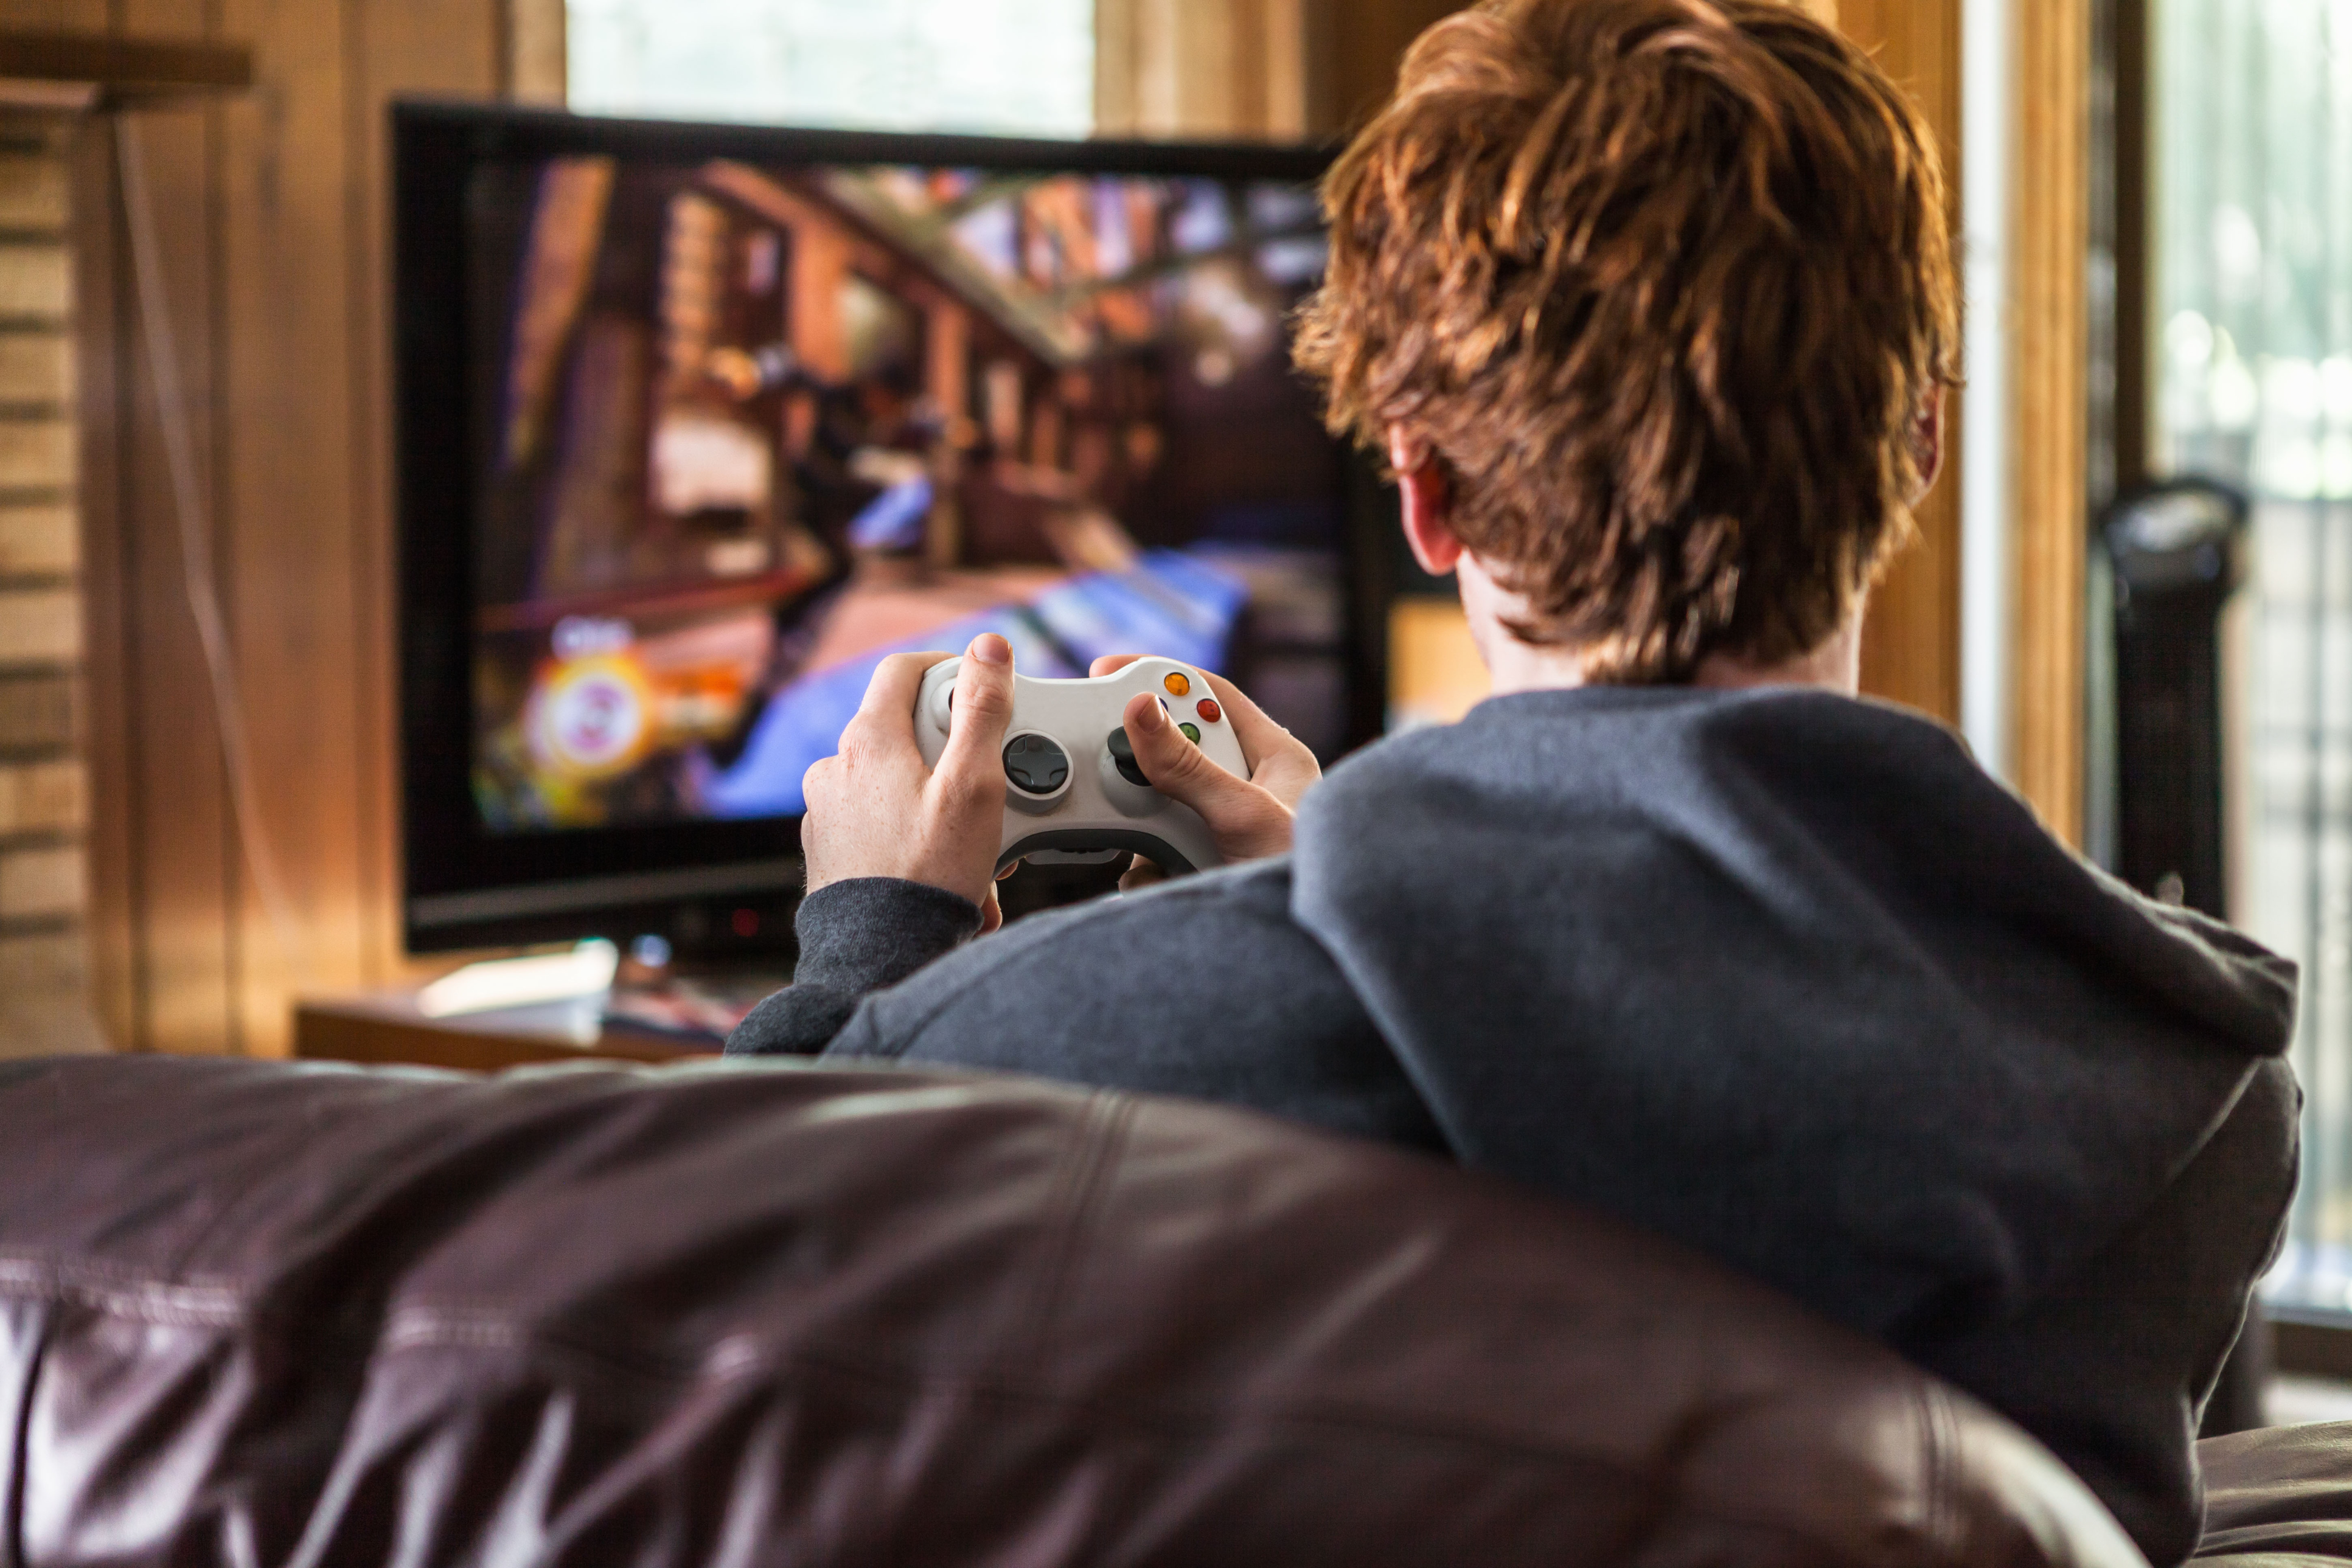 A teenager plays video games at home